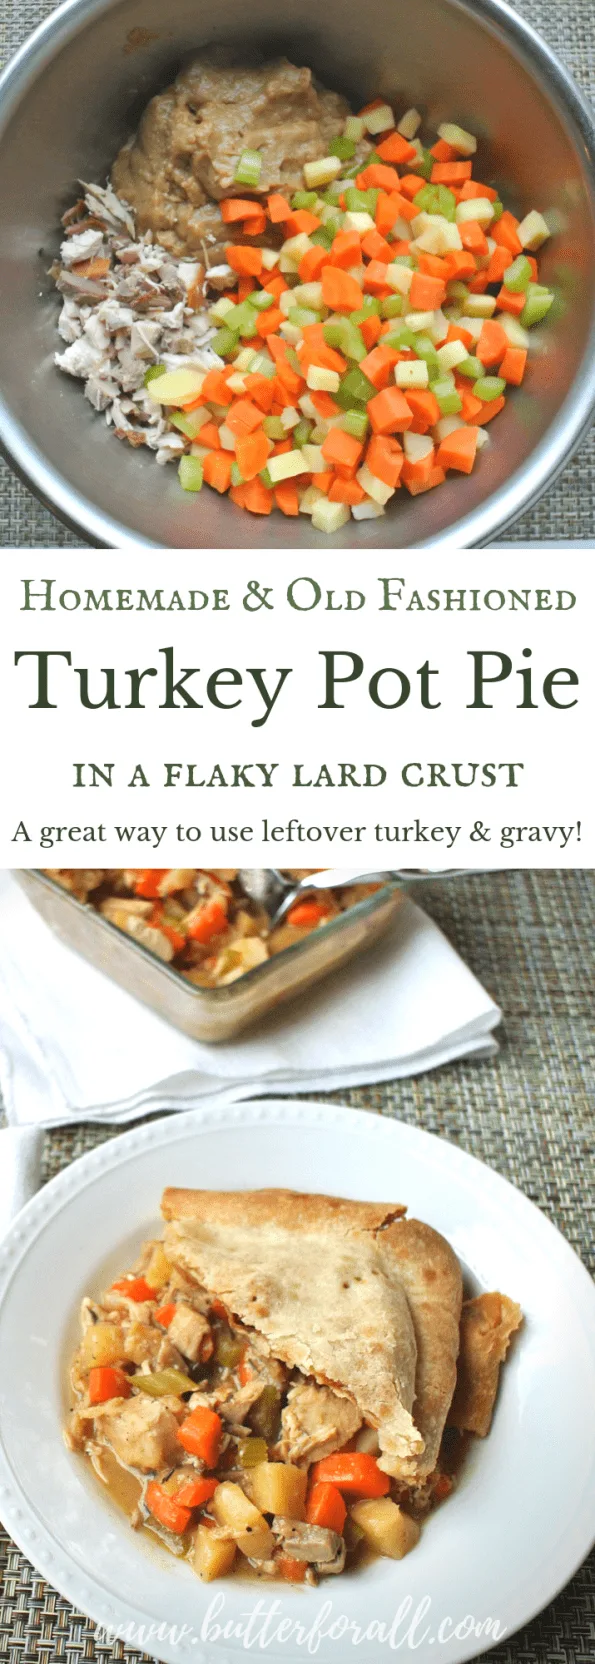 Homemade turkey pot pie collage with text overlay.